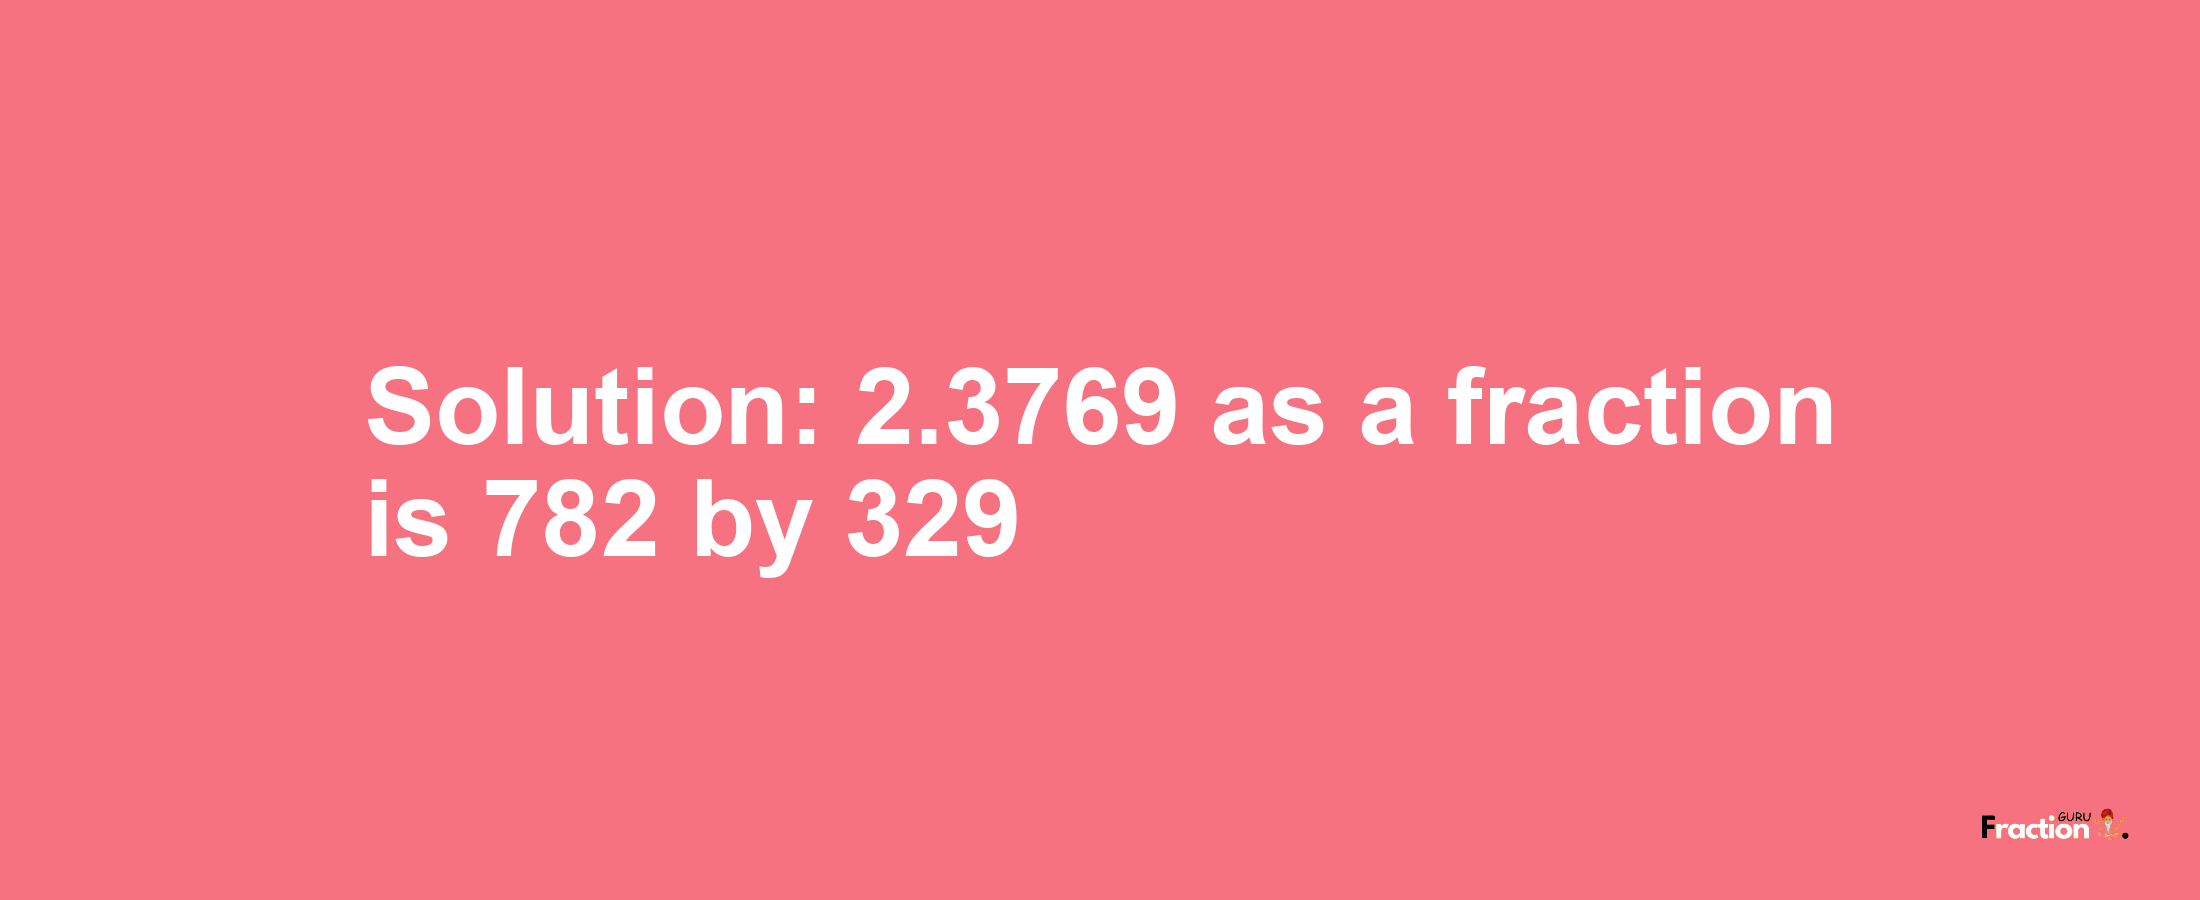 Solution:2.3769 as a fraction is 782/329